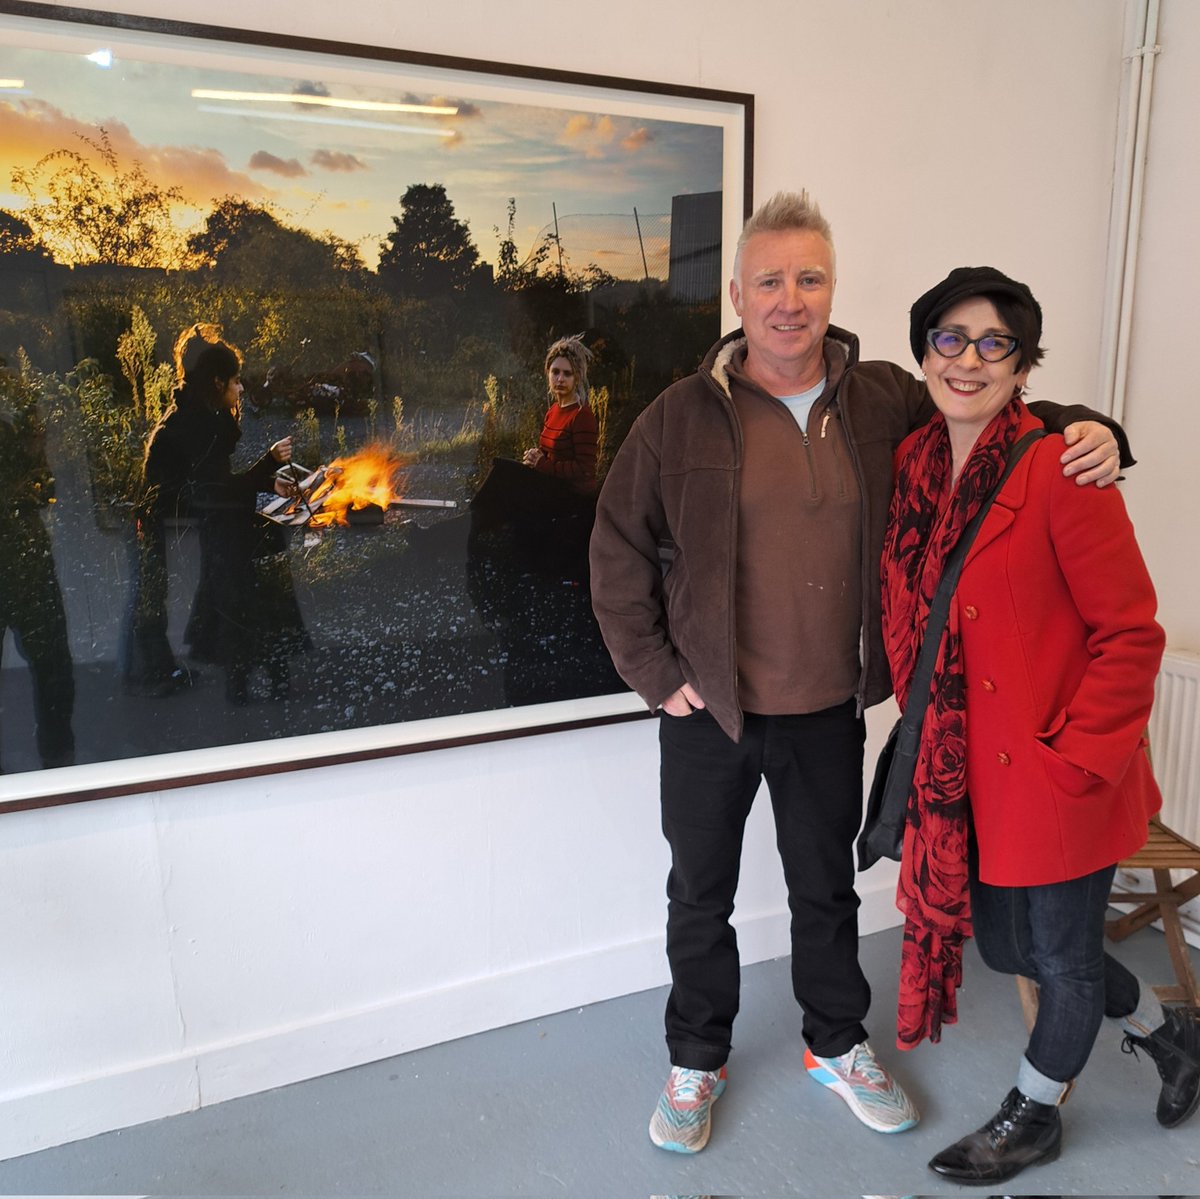 If you love photography, if you love Hackney, and esp if you love both, don't miss the chance to see the stunning 'Life & Death in Hackney' series by @TomHunterArt at @greygalleryldn Thanks to Tom for the great chats today about Hackney past & present thegreygallery.com